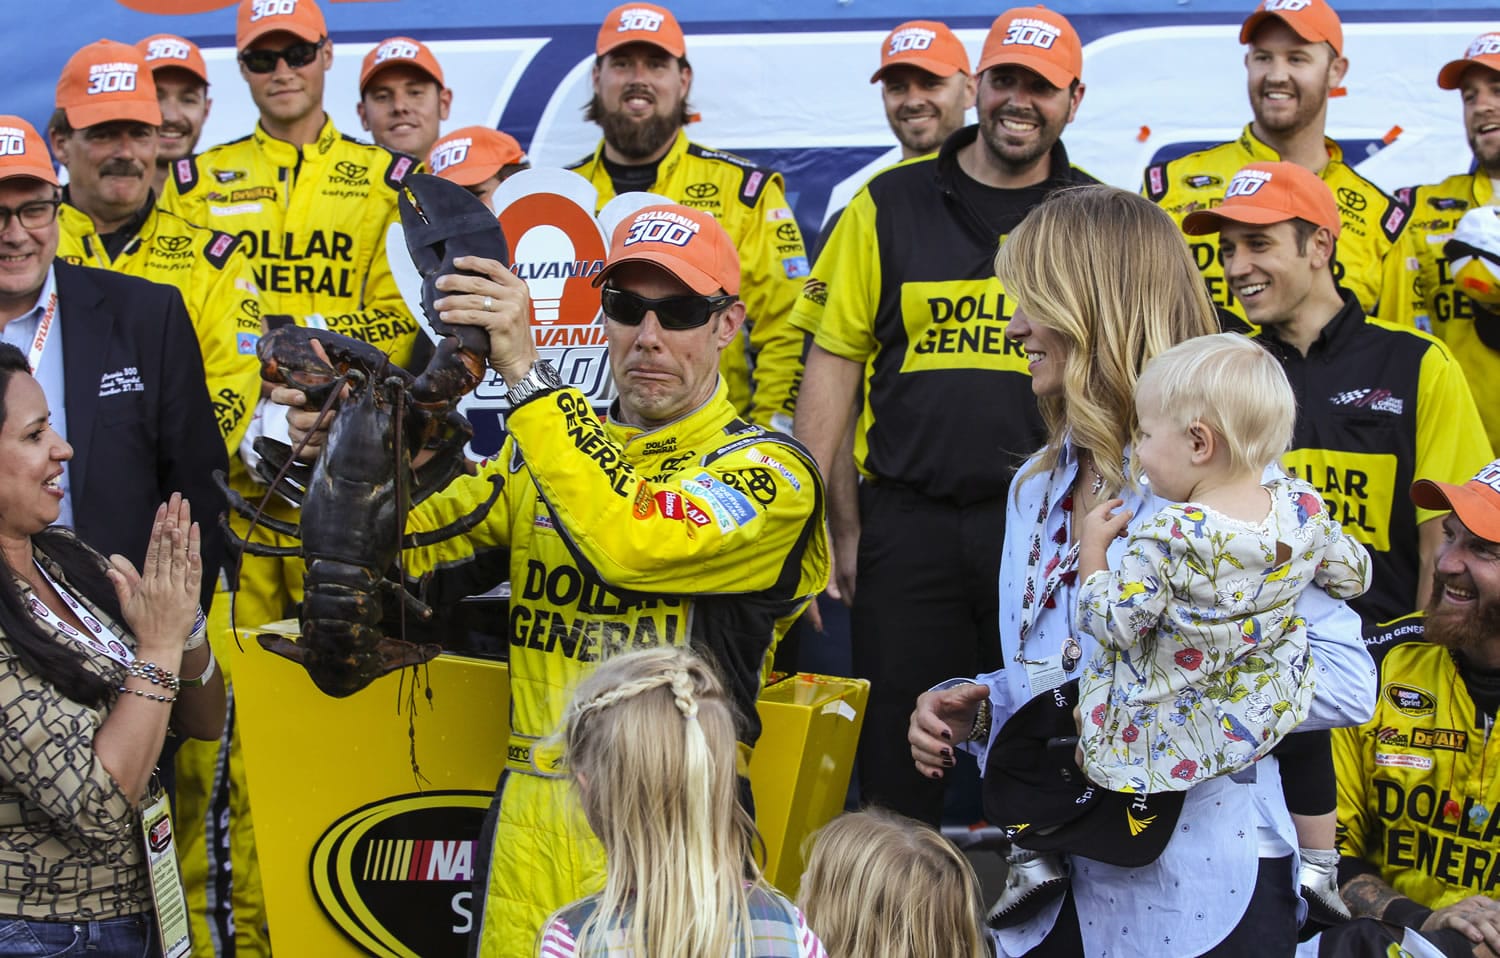 Matt Kenseth holds a lobster in Victory Lane after winning the NASCAR Sprint Cup series auto race at New Hampshire Motor Speedway in Loudon, N.H., Sunday, Sept. 27, 2015.